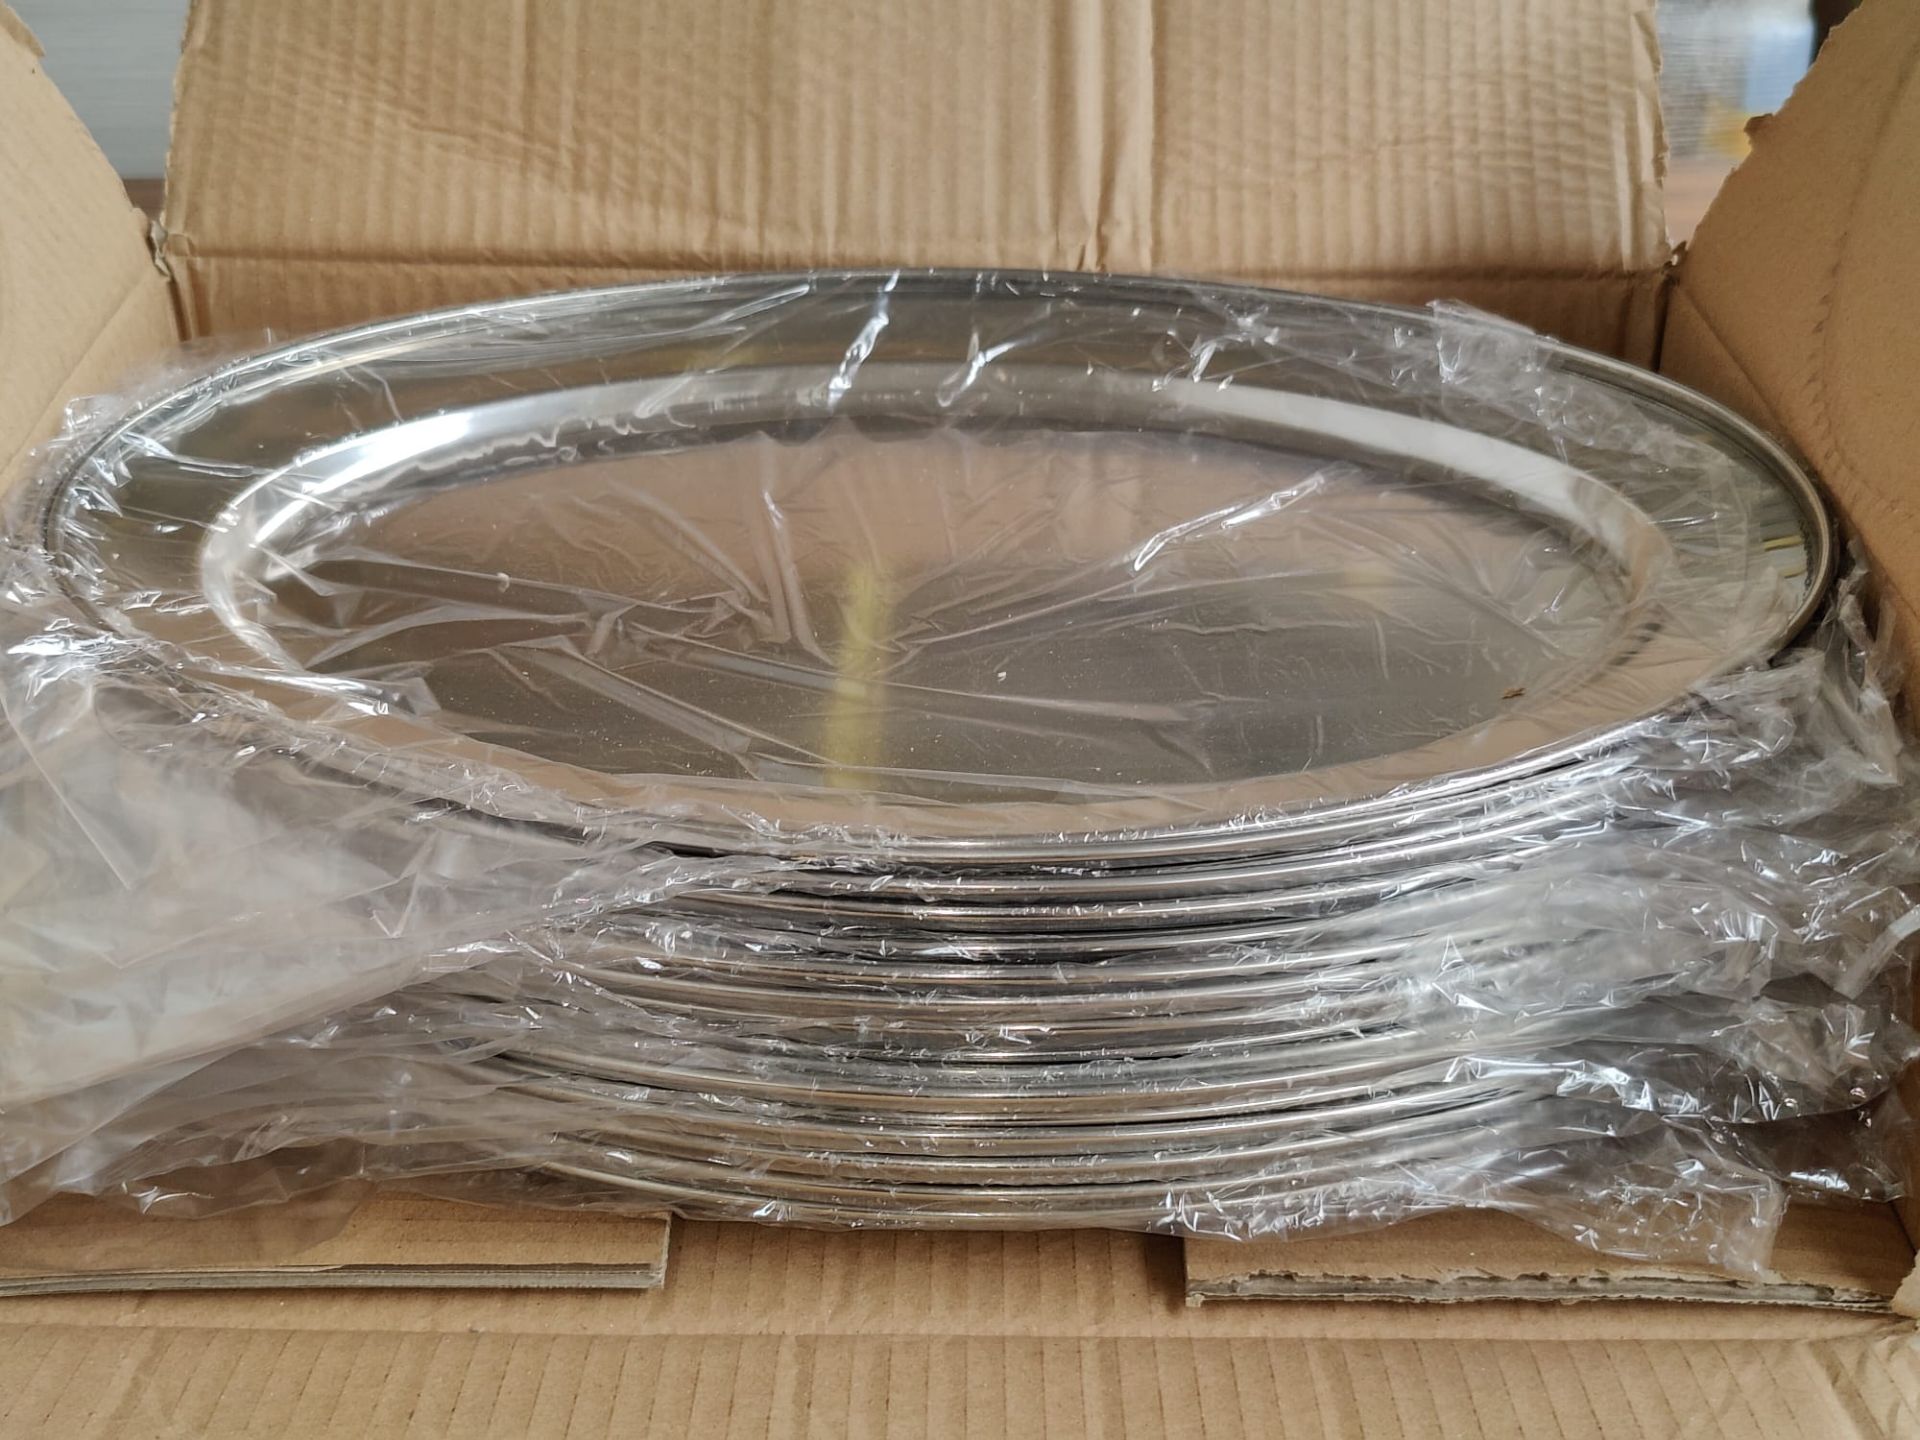 20 x Stainless Steel Oval Service Trays - Size: 450mm x 310mm - Brand New Boxed Stock - RRP £200 - Image 5 of 8